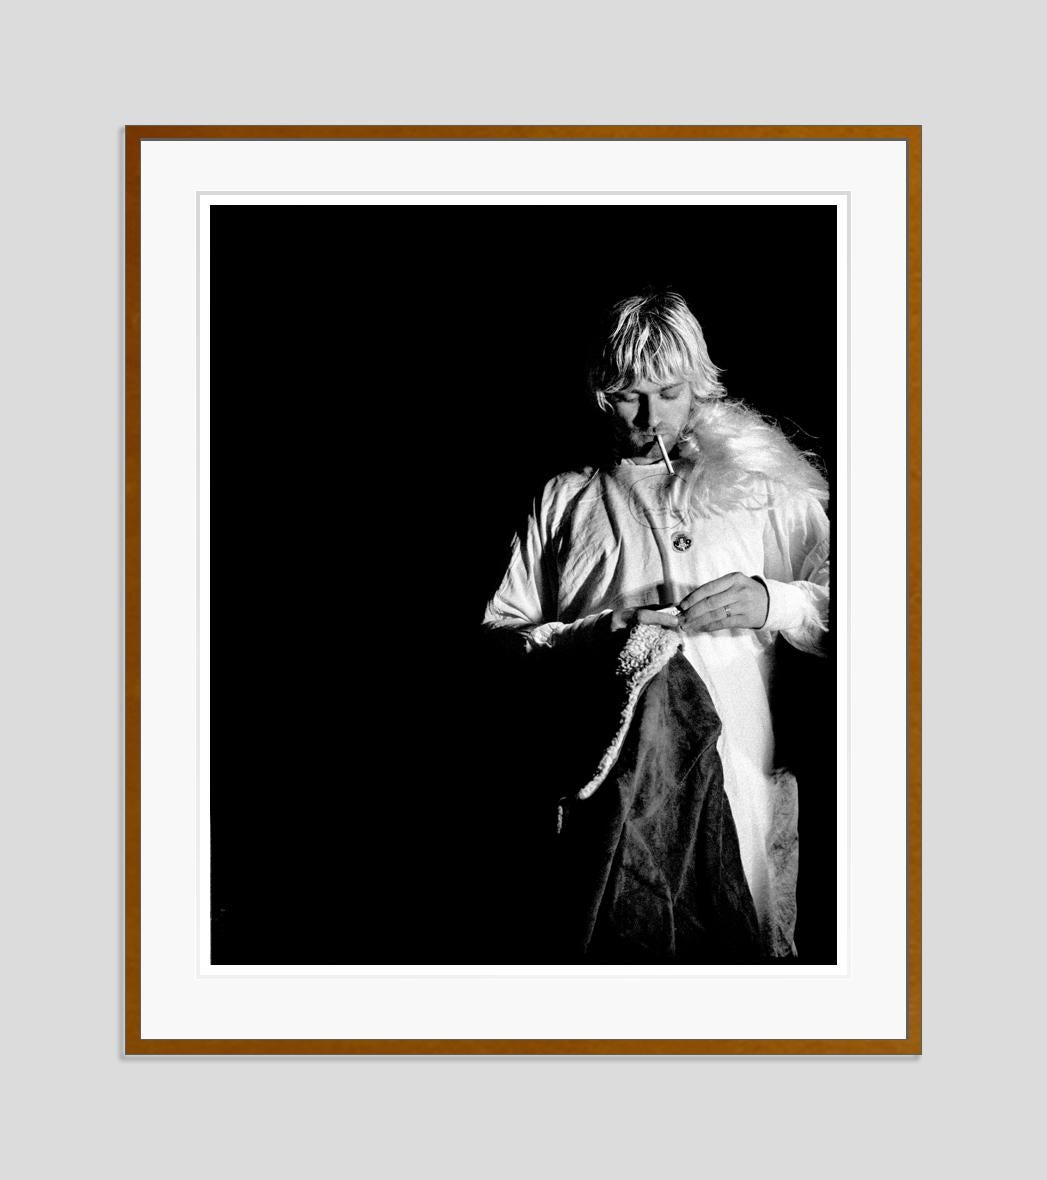 Kurt Cobain

2010

Jarvis Cocker, Pulp photographed by Kevin Westenberg for NME Magazine in Paris in July 1996.

by Kevin Westenberg
Signed Limited Edition

Kevin Westenberg is famed for his creation of provocative and electrifying images of